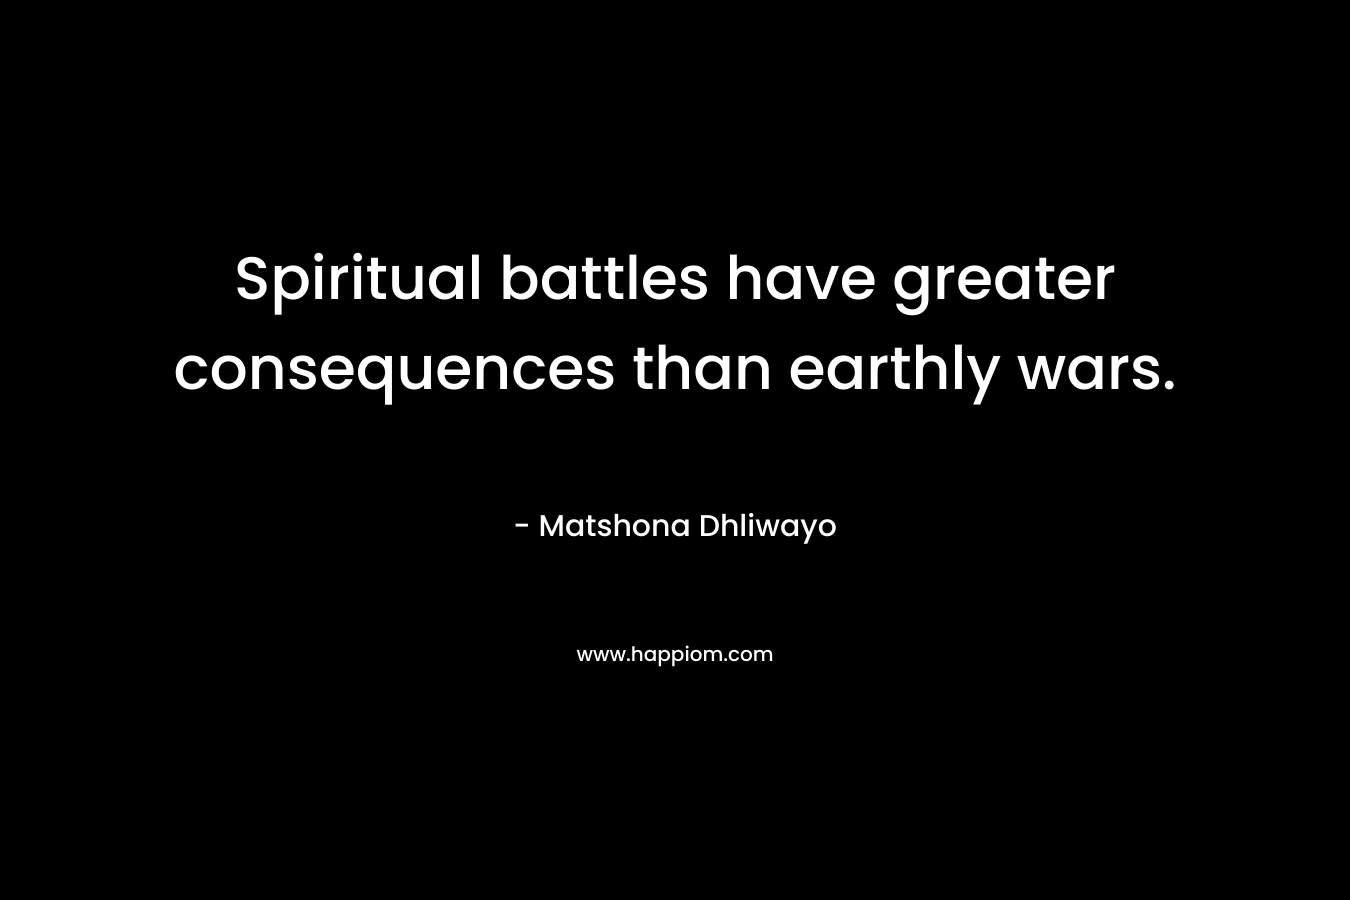 Spiritual battles have greater consequences than earthly wars.